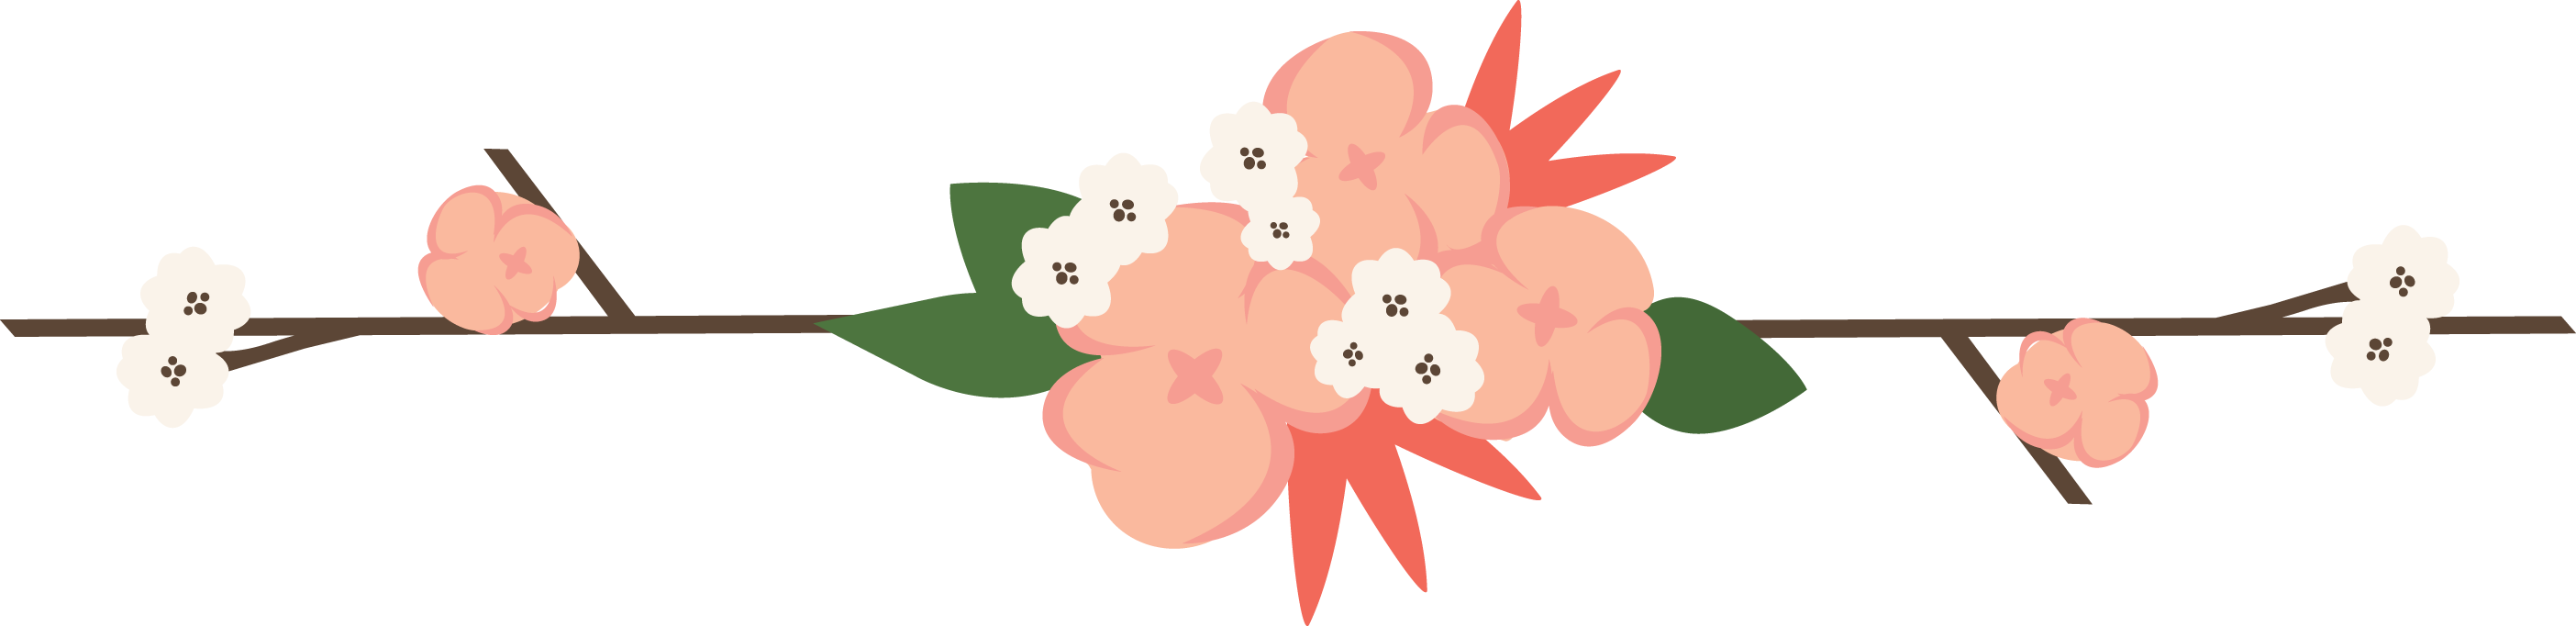 The Dowlins - Flower Divider Png (2808x682)